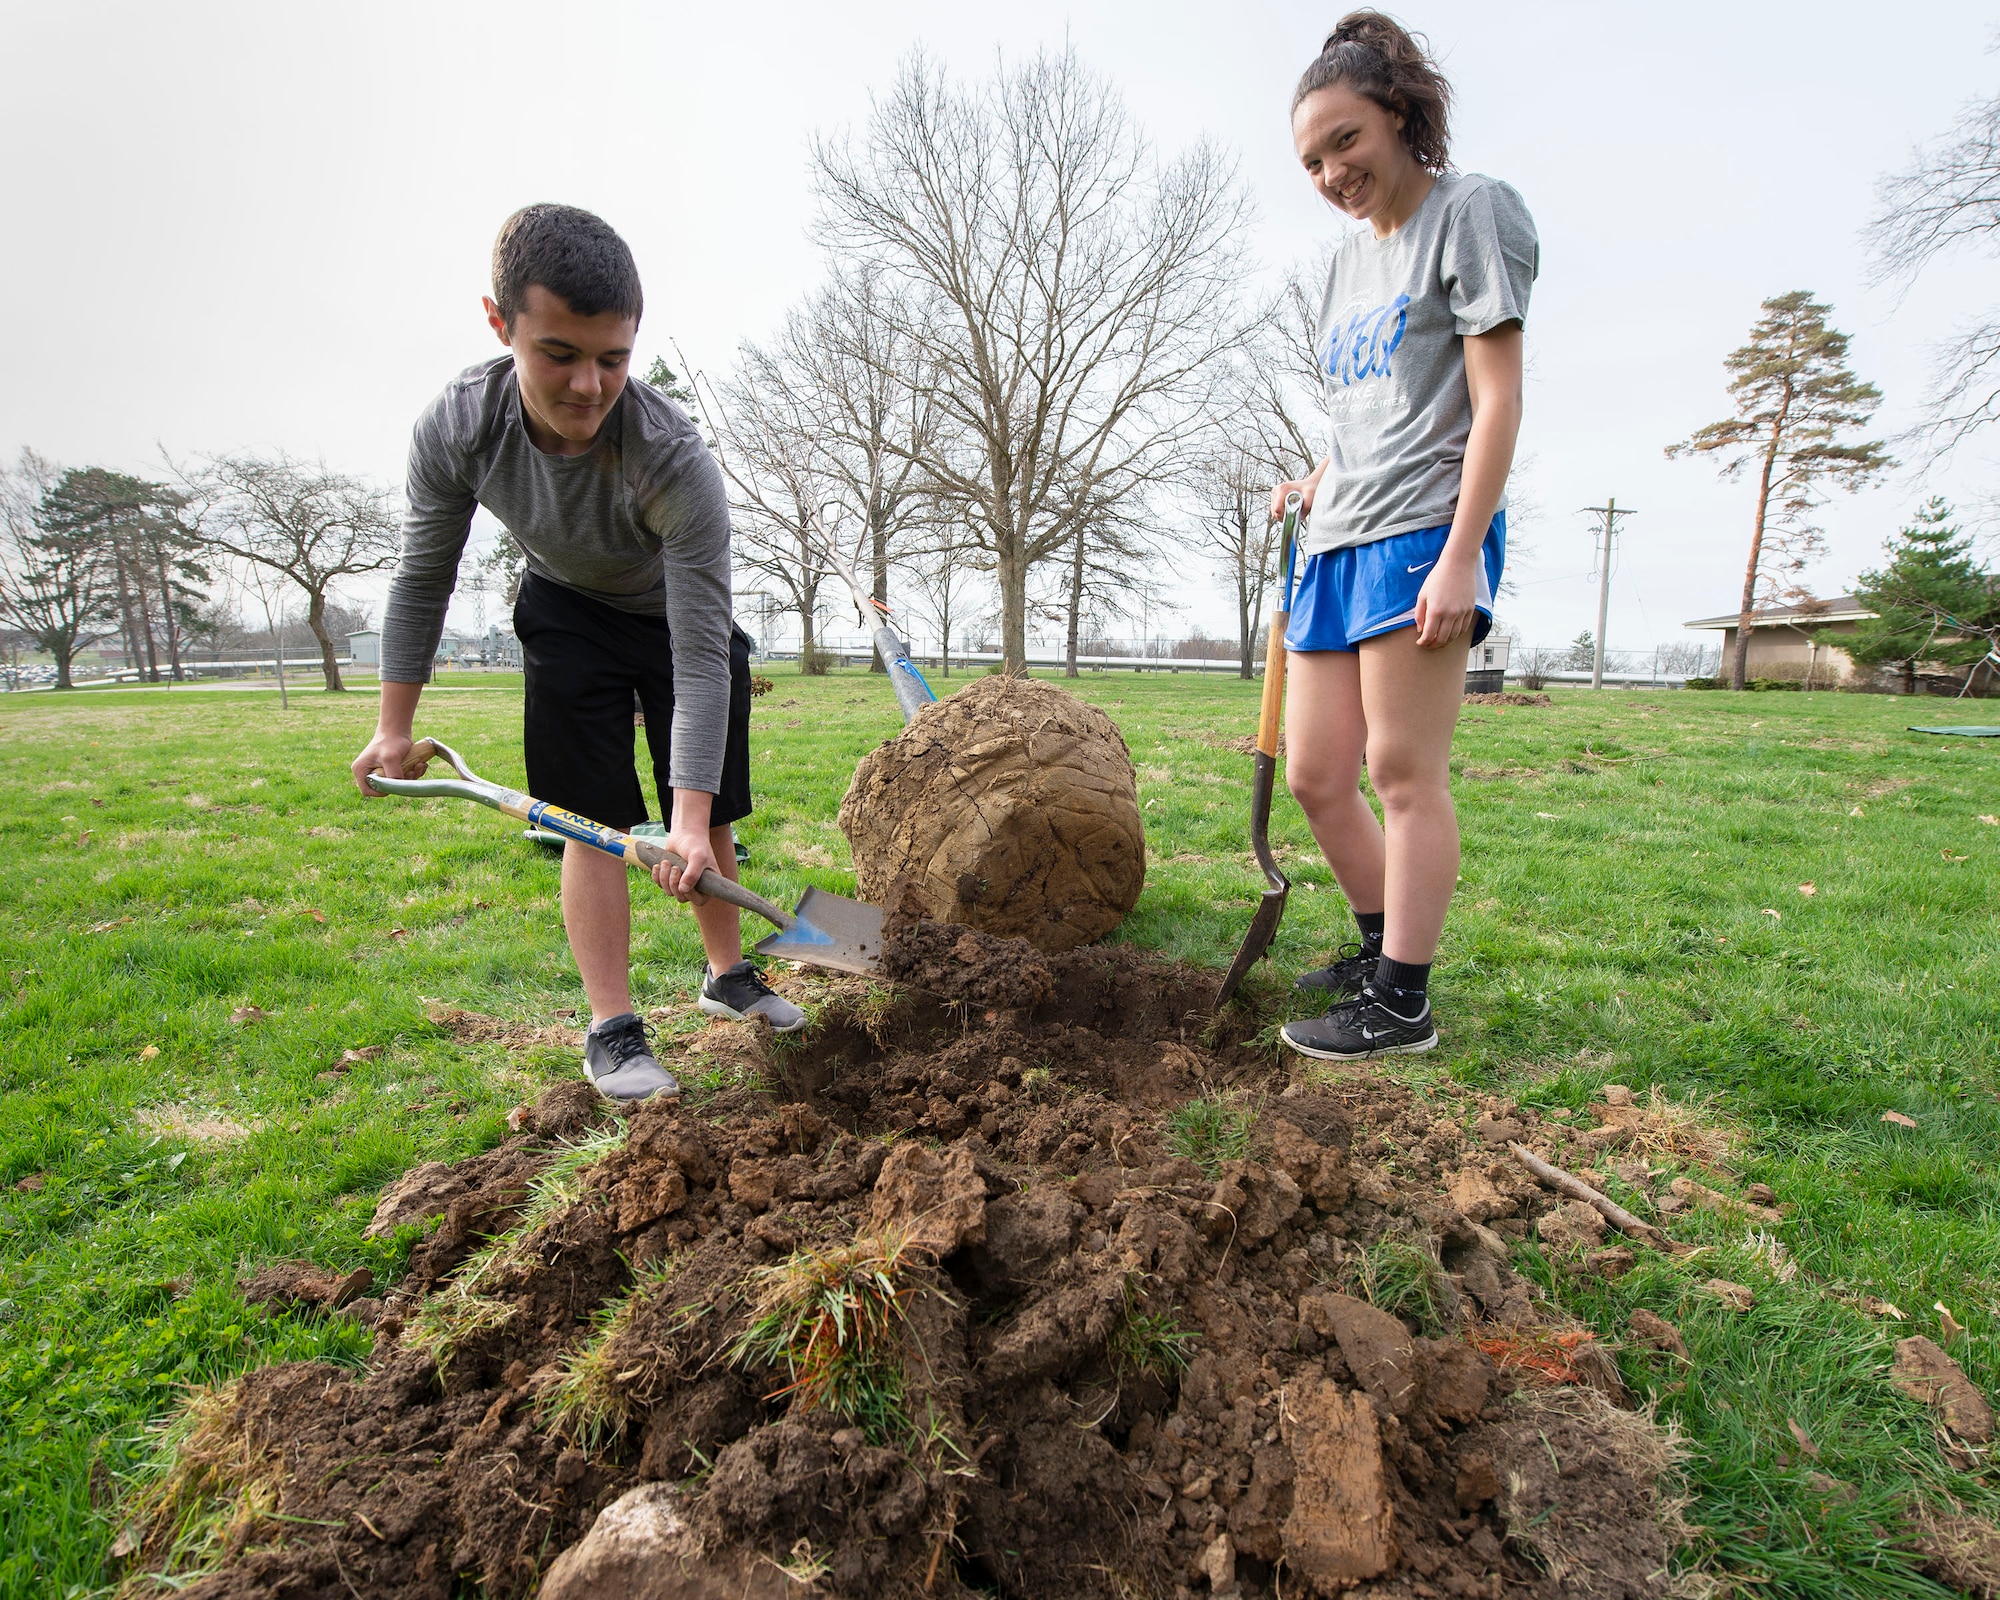 Collin Amon (left) and LeeAnn Williams, Fairborn High School advanced placement environmental science students, prepare the soil for planting a redbud tree as part of the 88th Civil Engineer Group and the National Park Service volunteer efforts for Arbor Day on the grounds near the Wright Brothers Memorial, Dayton, Ohio, April 11, 2019. The students volunteered their support efforts in honor of Arbor Day, an annual holiday for the planting of trees, observed throughout the nation. (U.S. Air Force photo by Michelle Gigante)